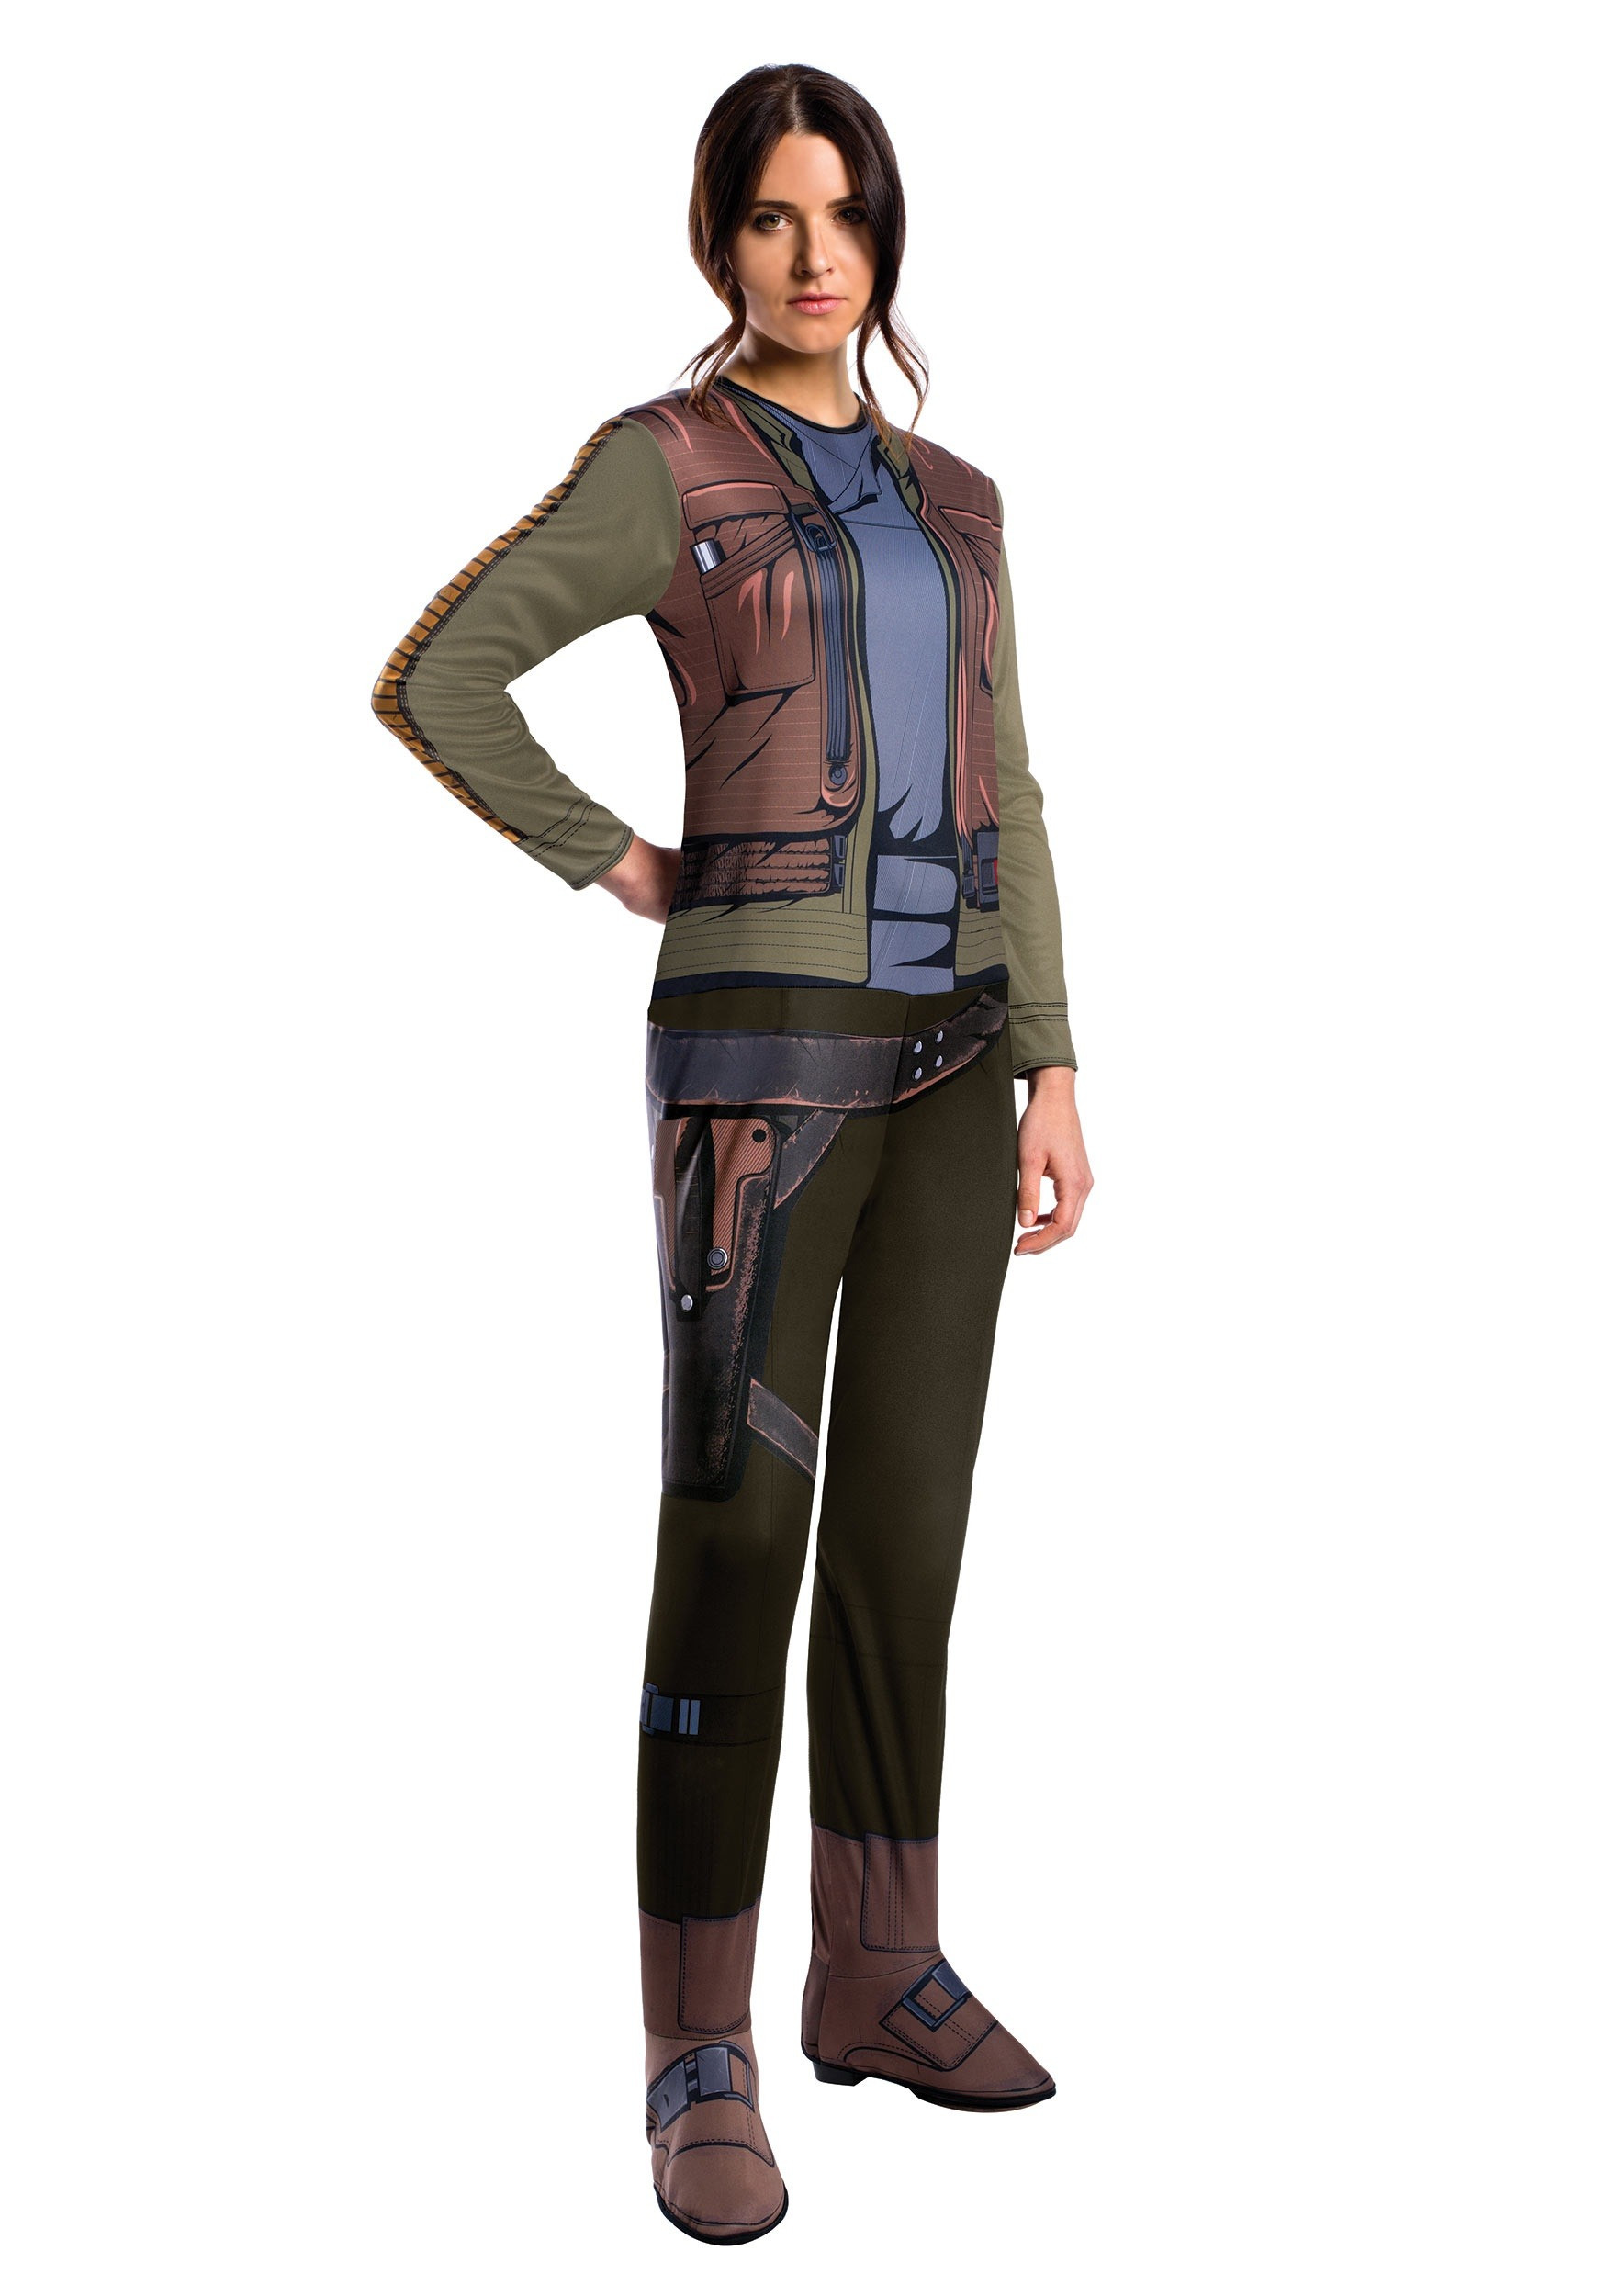 Jyn Erso Costume DIY
 Jyn Erso Women s Adult Costume from Star Wars Rogue e